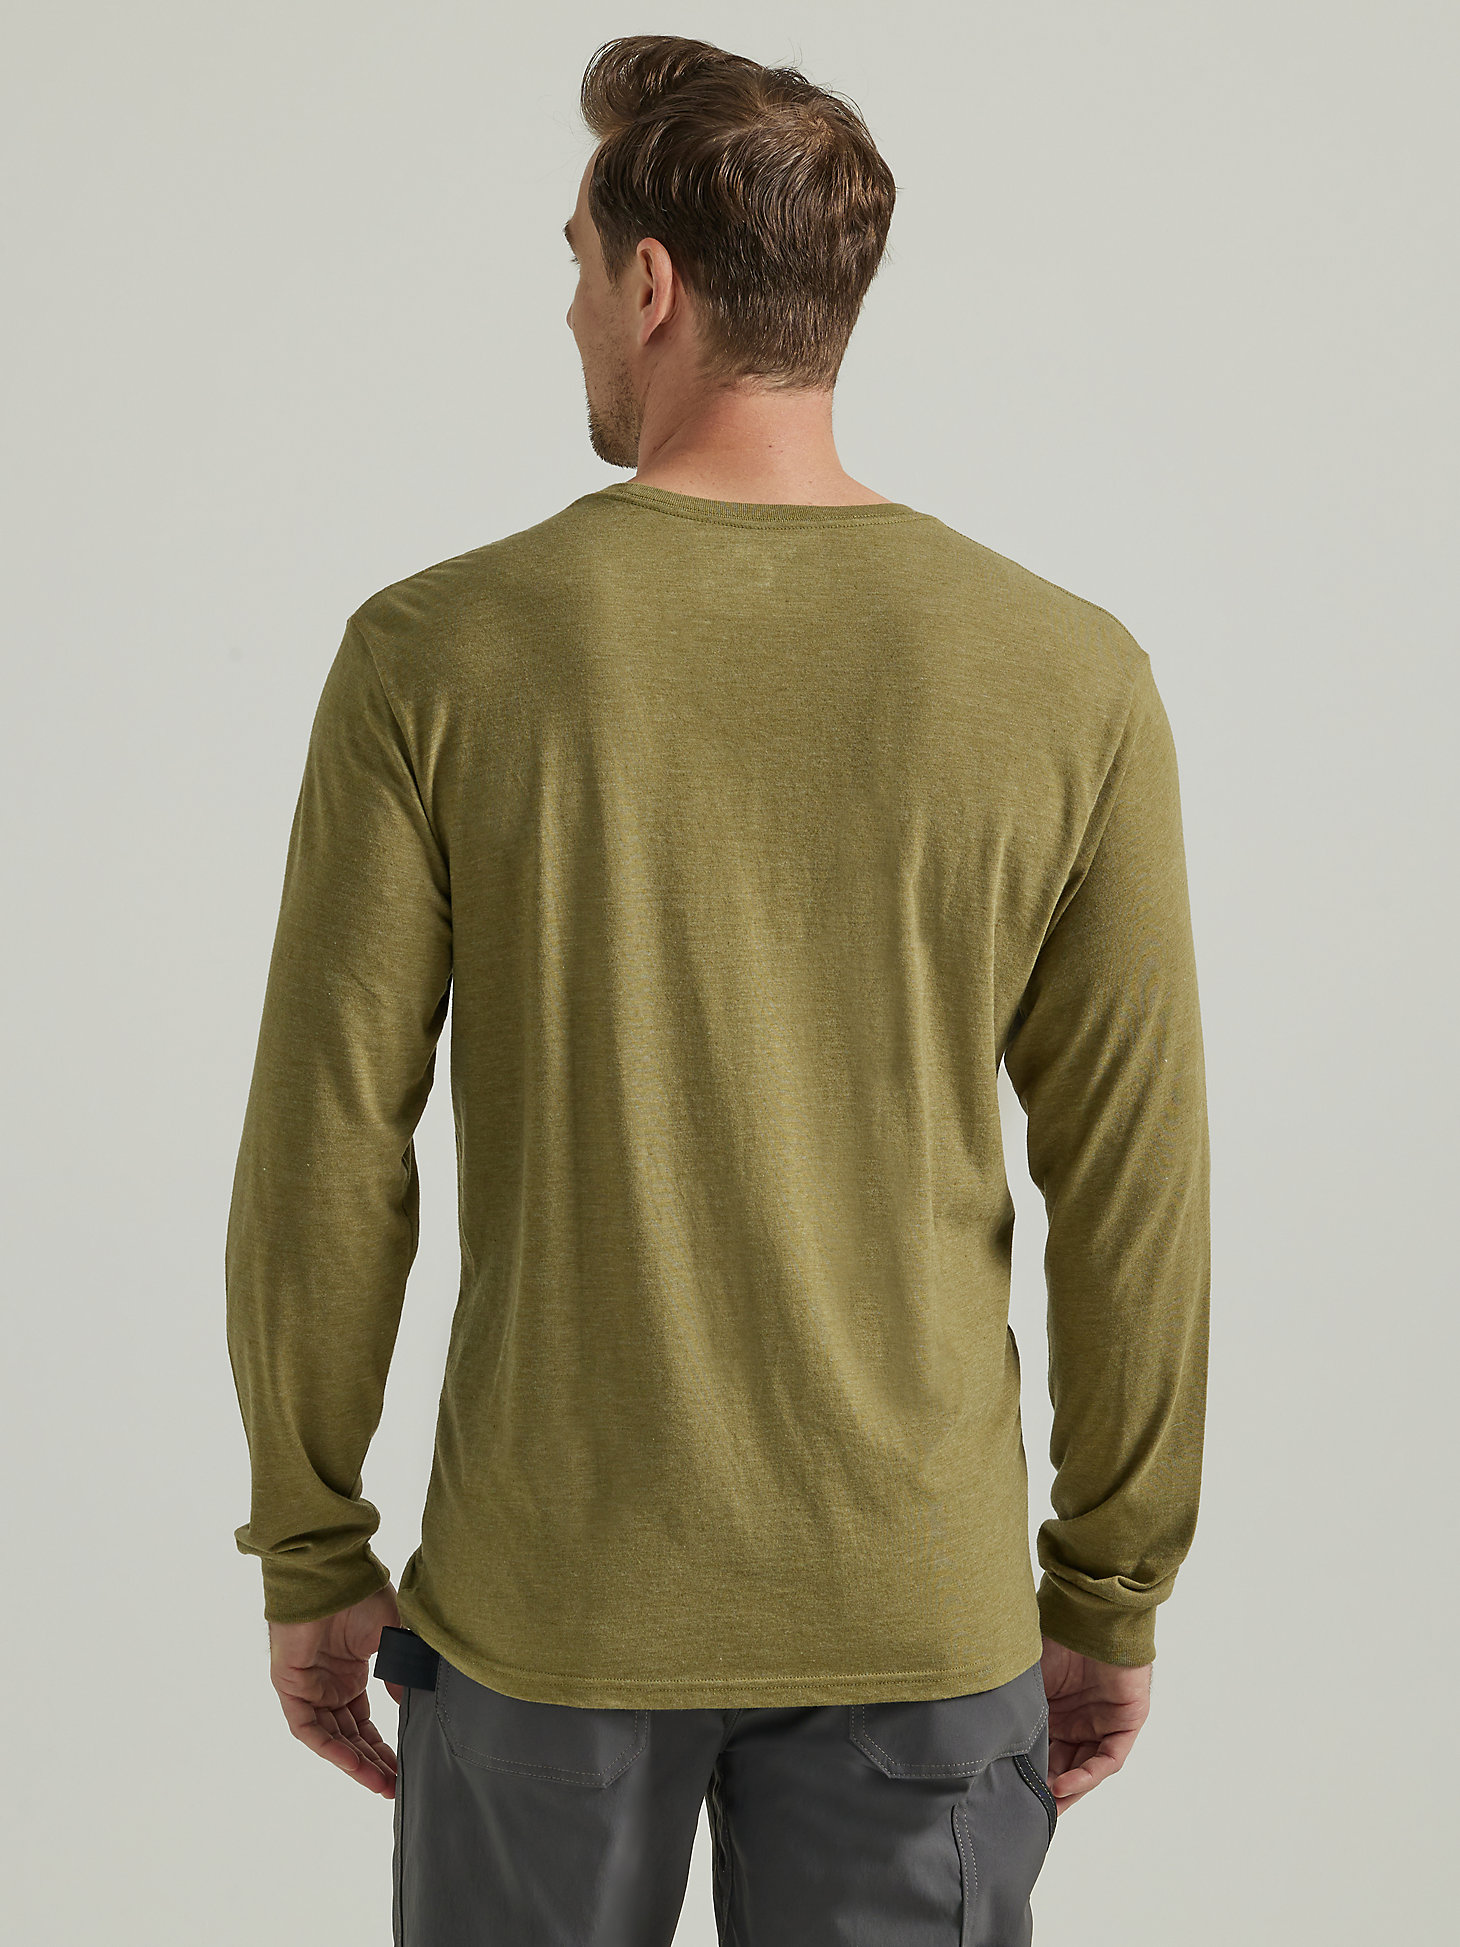 Wrangler® RIGGS Workwear® Relaxed Front Long Sleeve Graphic T-Shirt in Capulet Olive alternative view 2